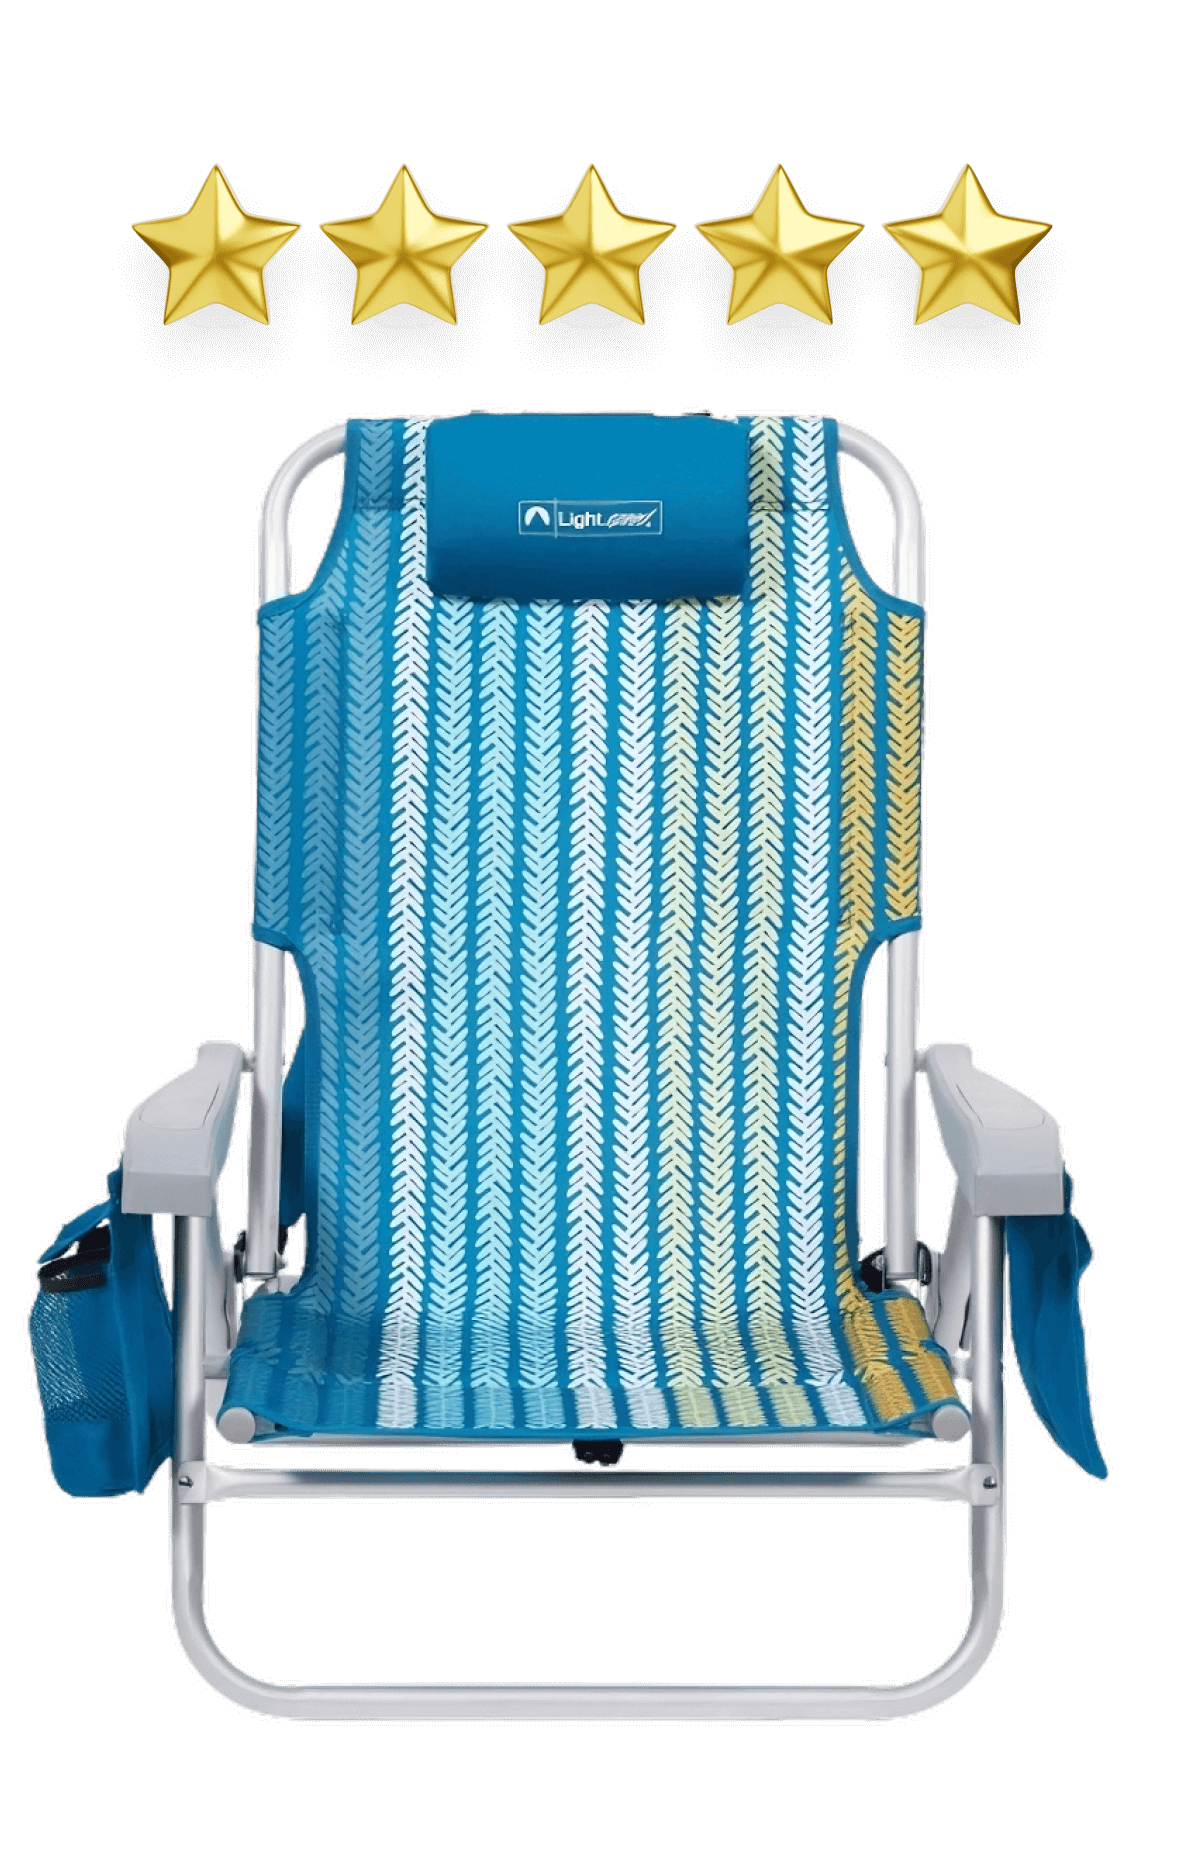 Lightspeed Outdoors chair with 5 star rating